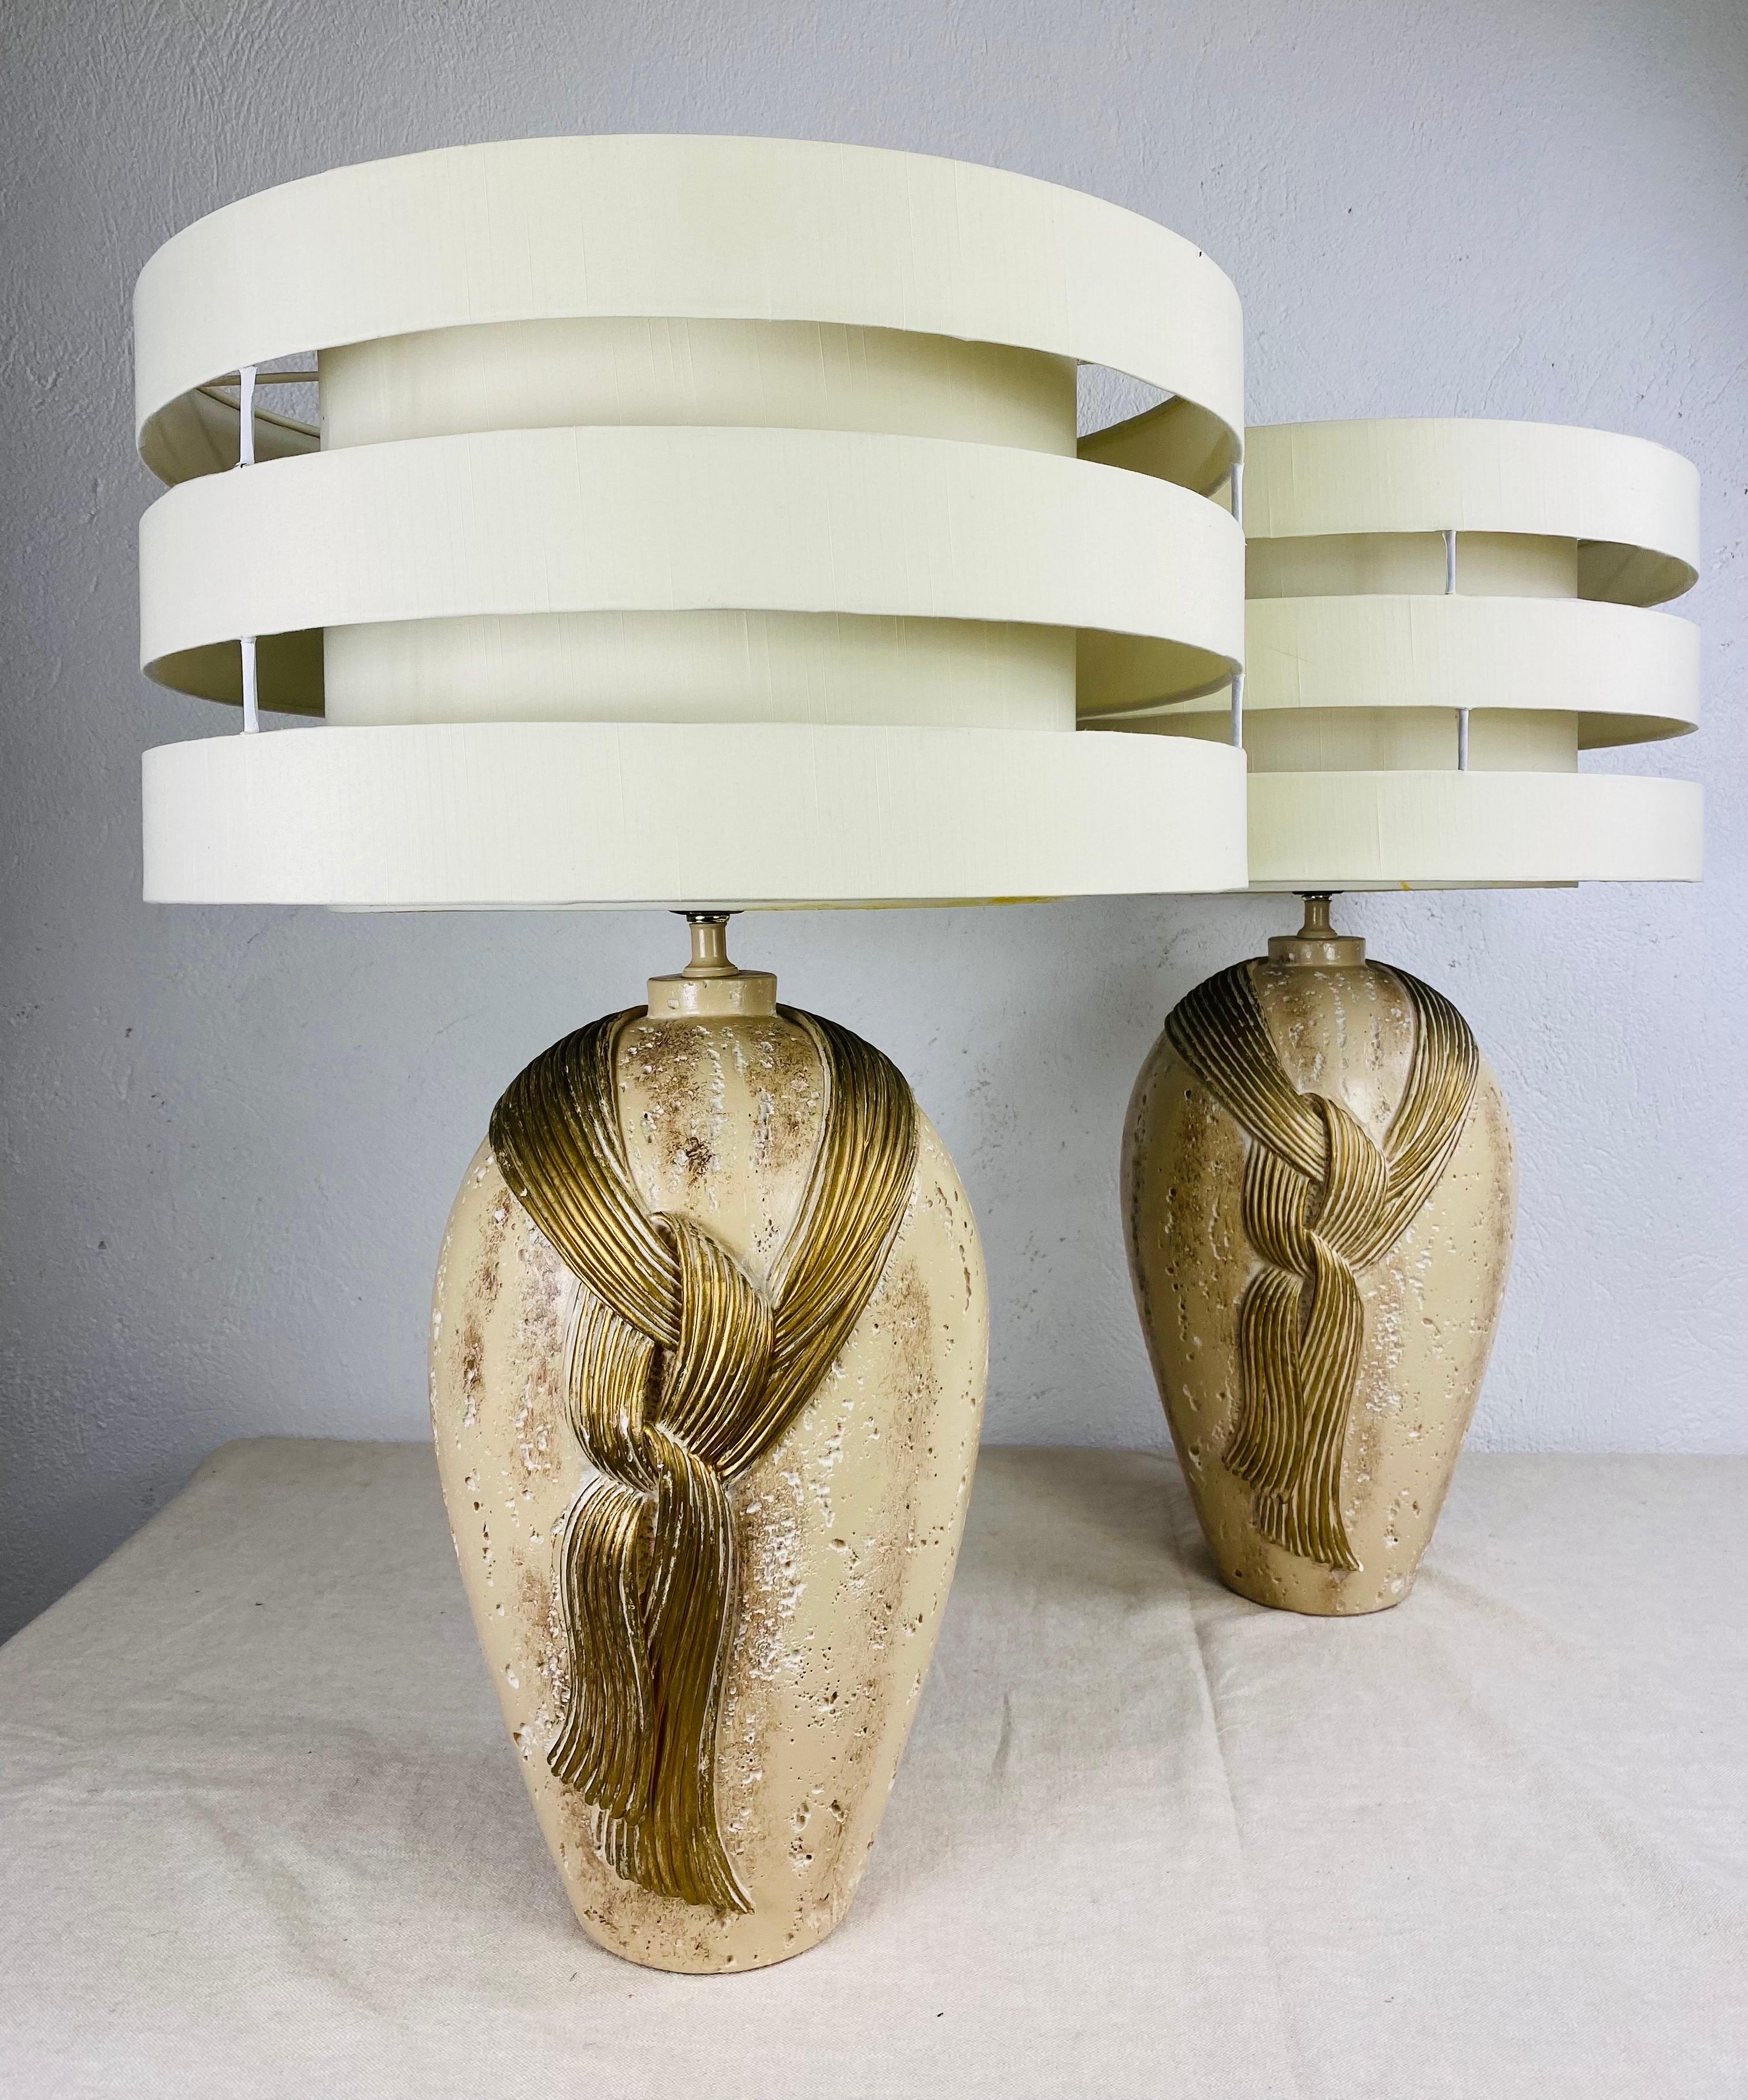 Mid-20th Century Art Deco Inspired Plaster Table Lamps with Custom Shades For Sale 3